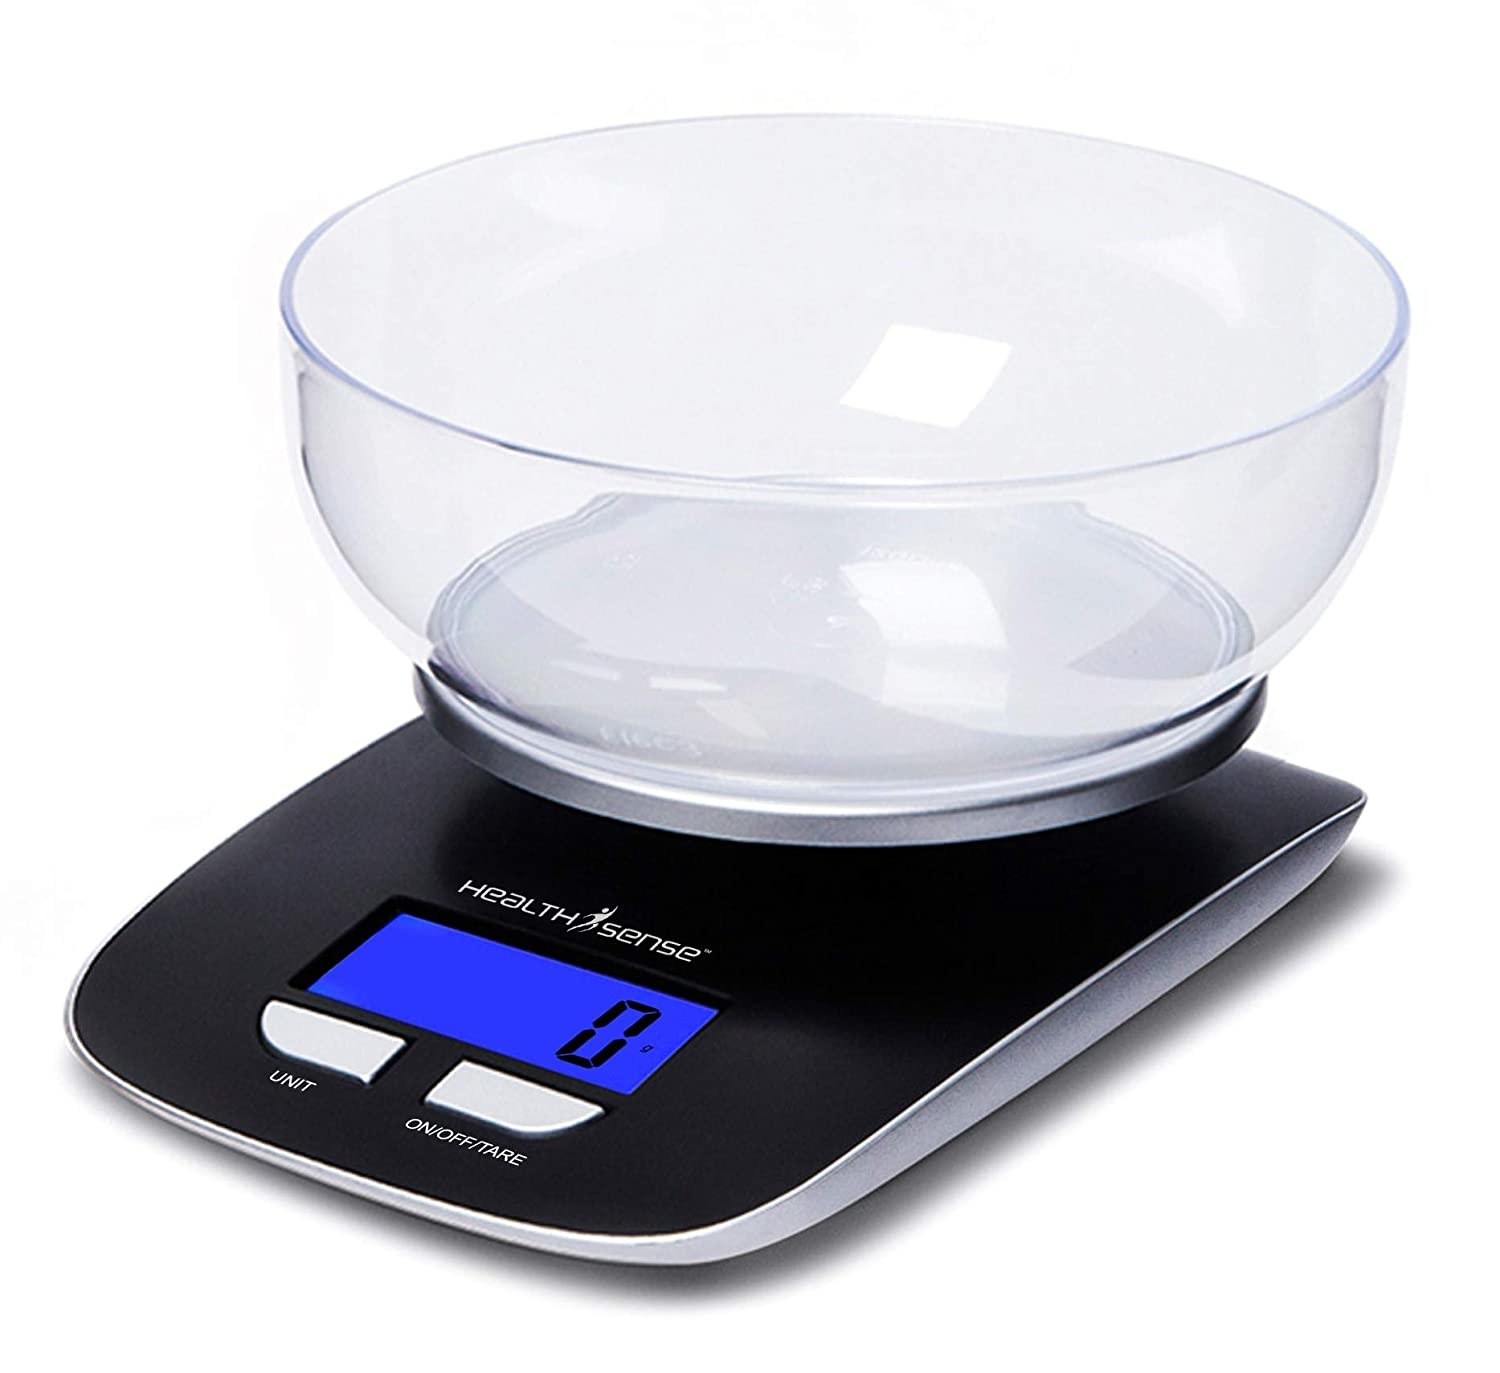 A digital weighing scale